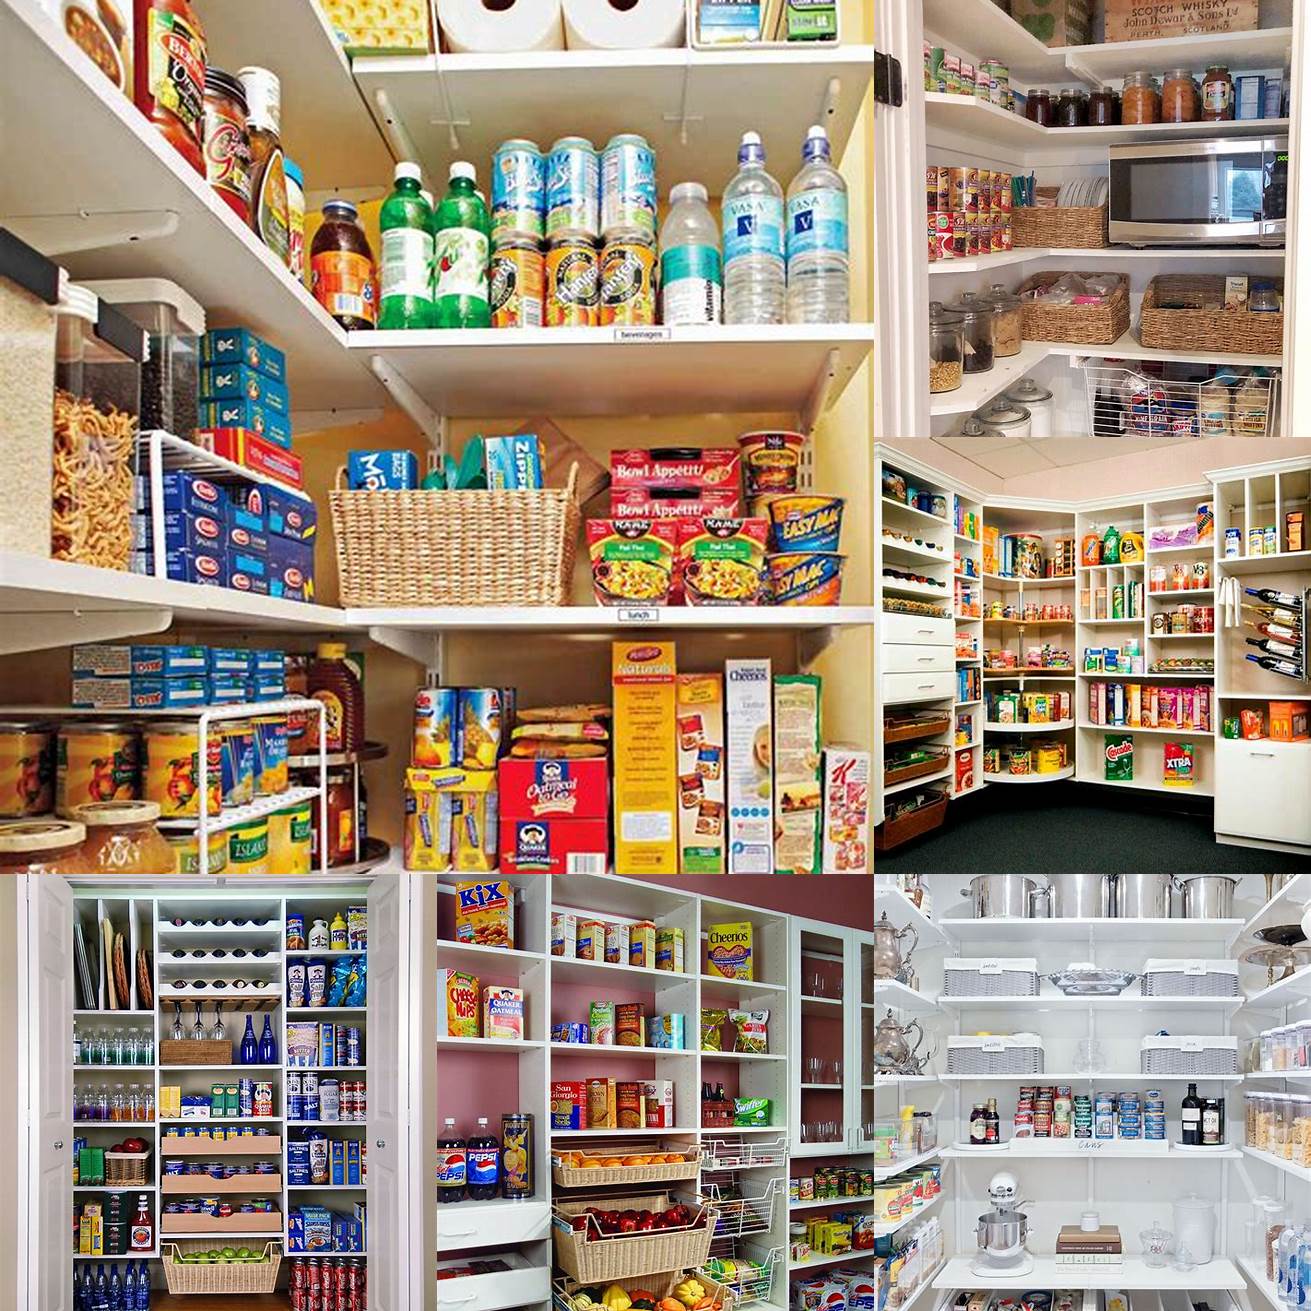 Image of a pantry cabinet filled with food items